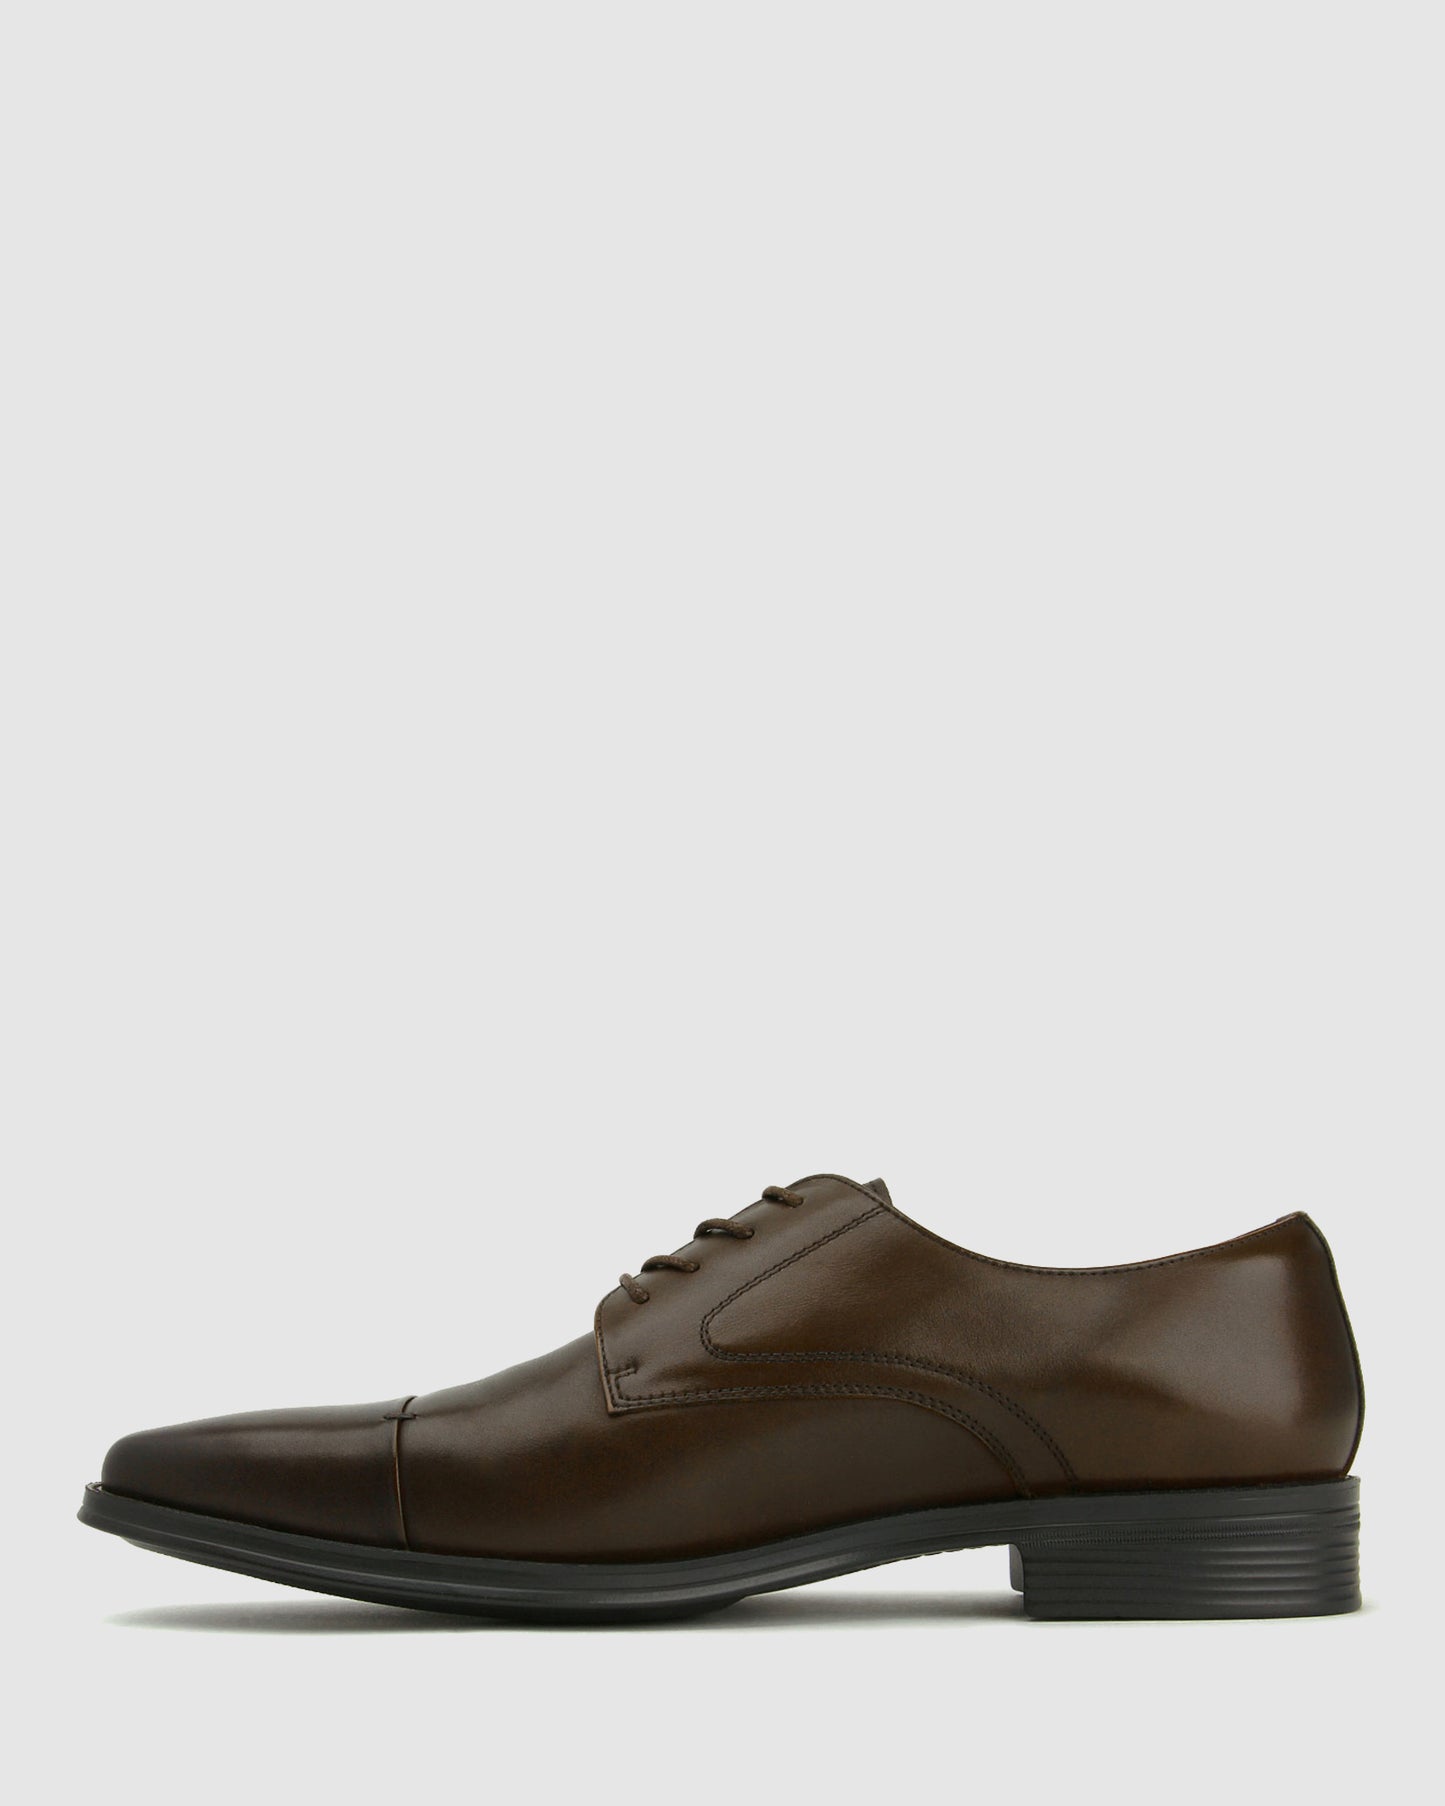 HANGER Leather Dress Shoes